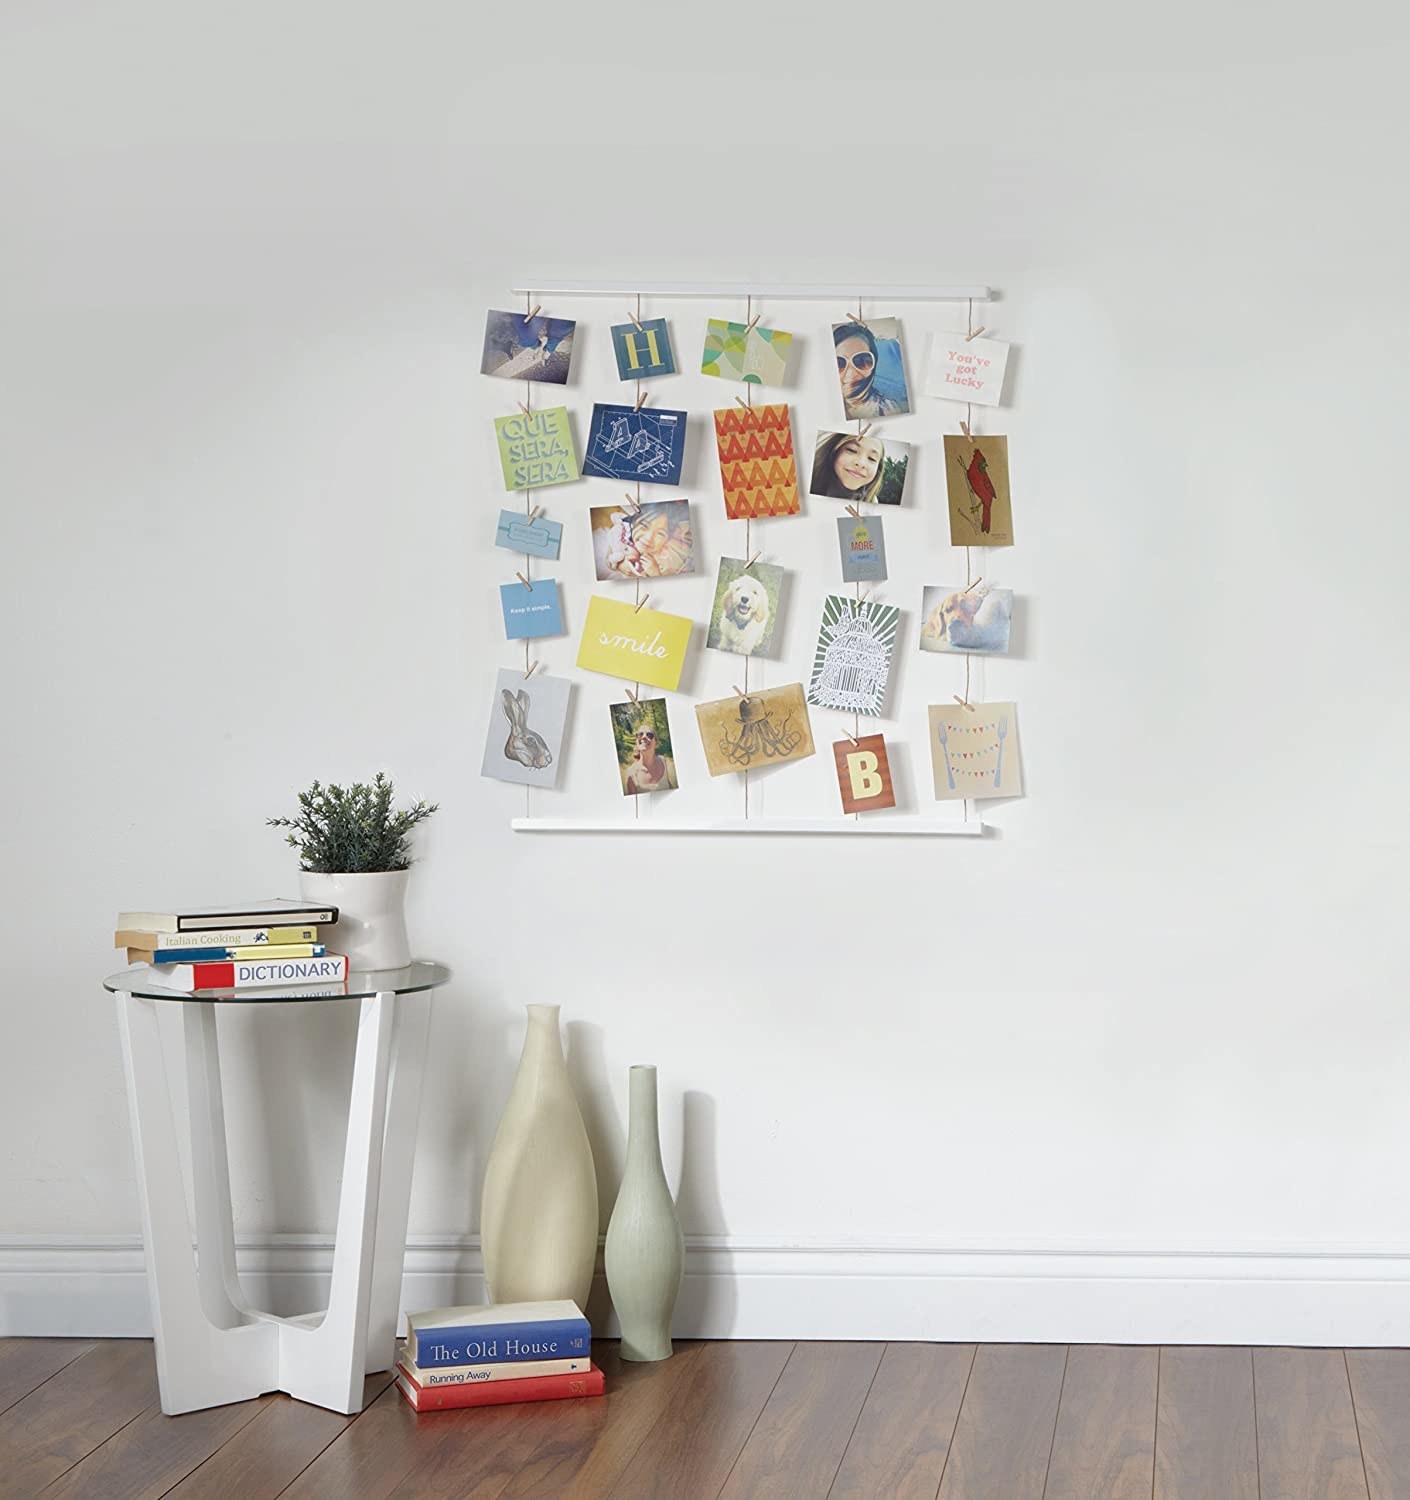 The hanging collage kit hanging vertically on a plain wall next to a small table with books on it, and vases on the floor